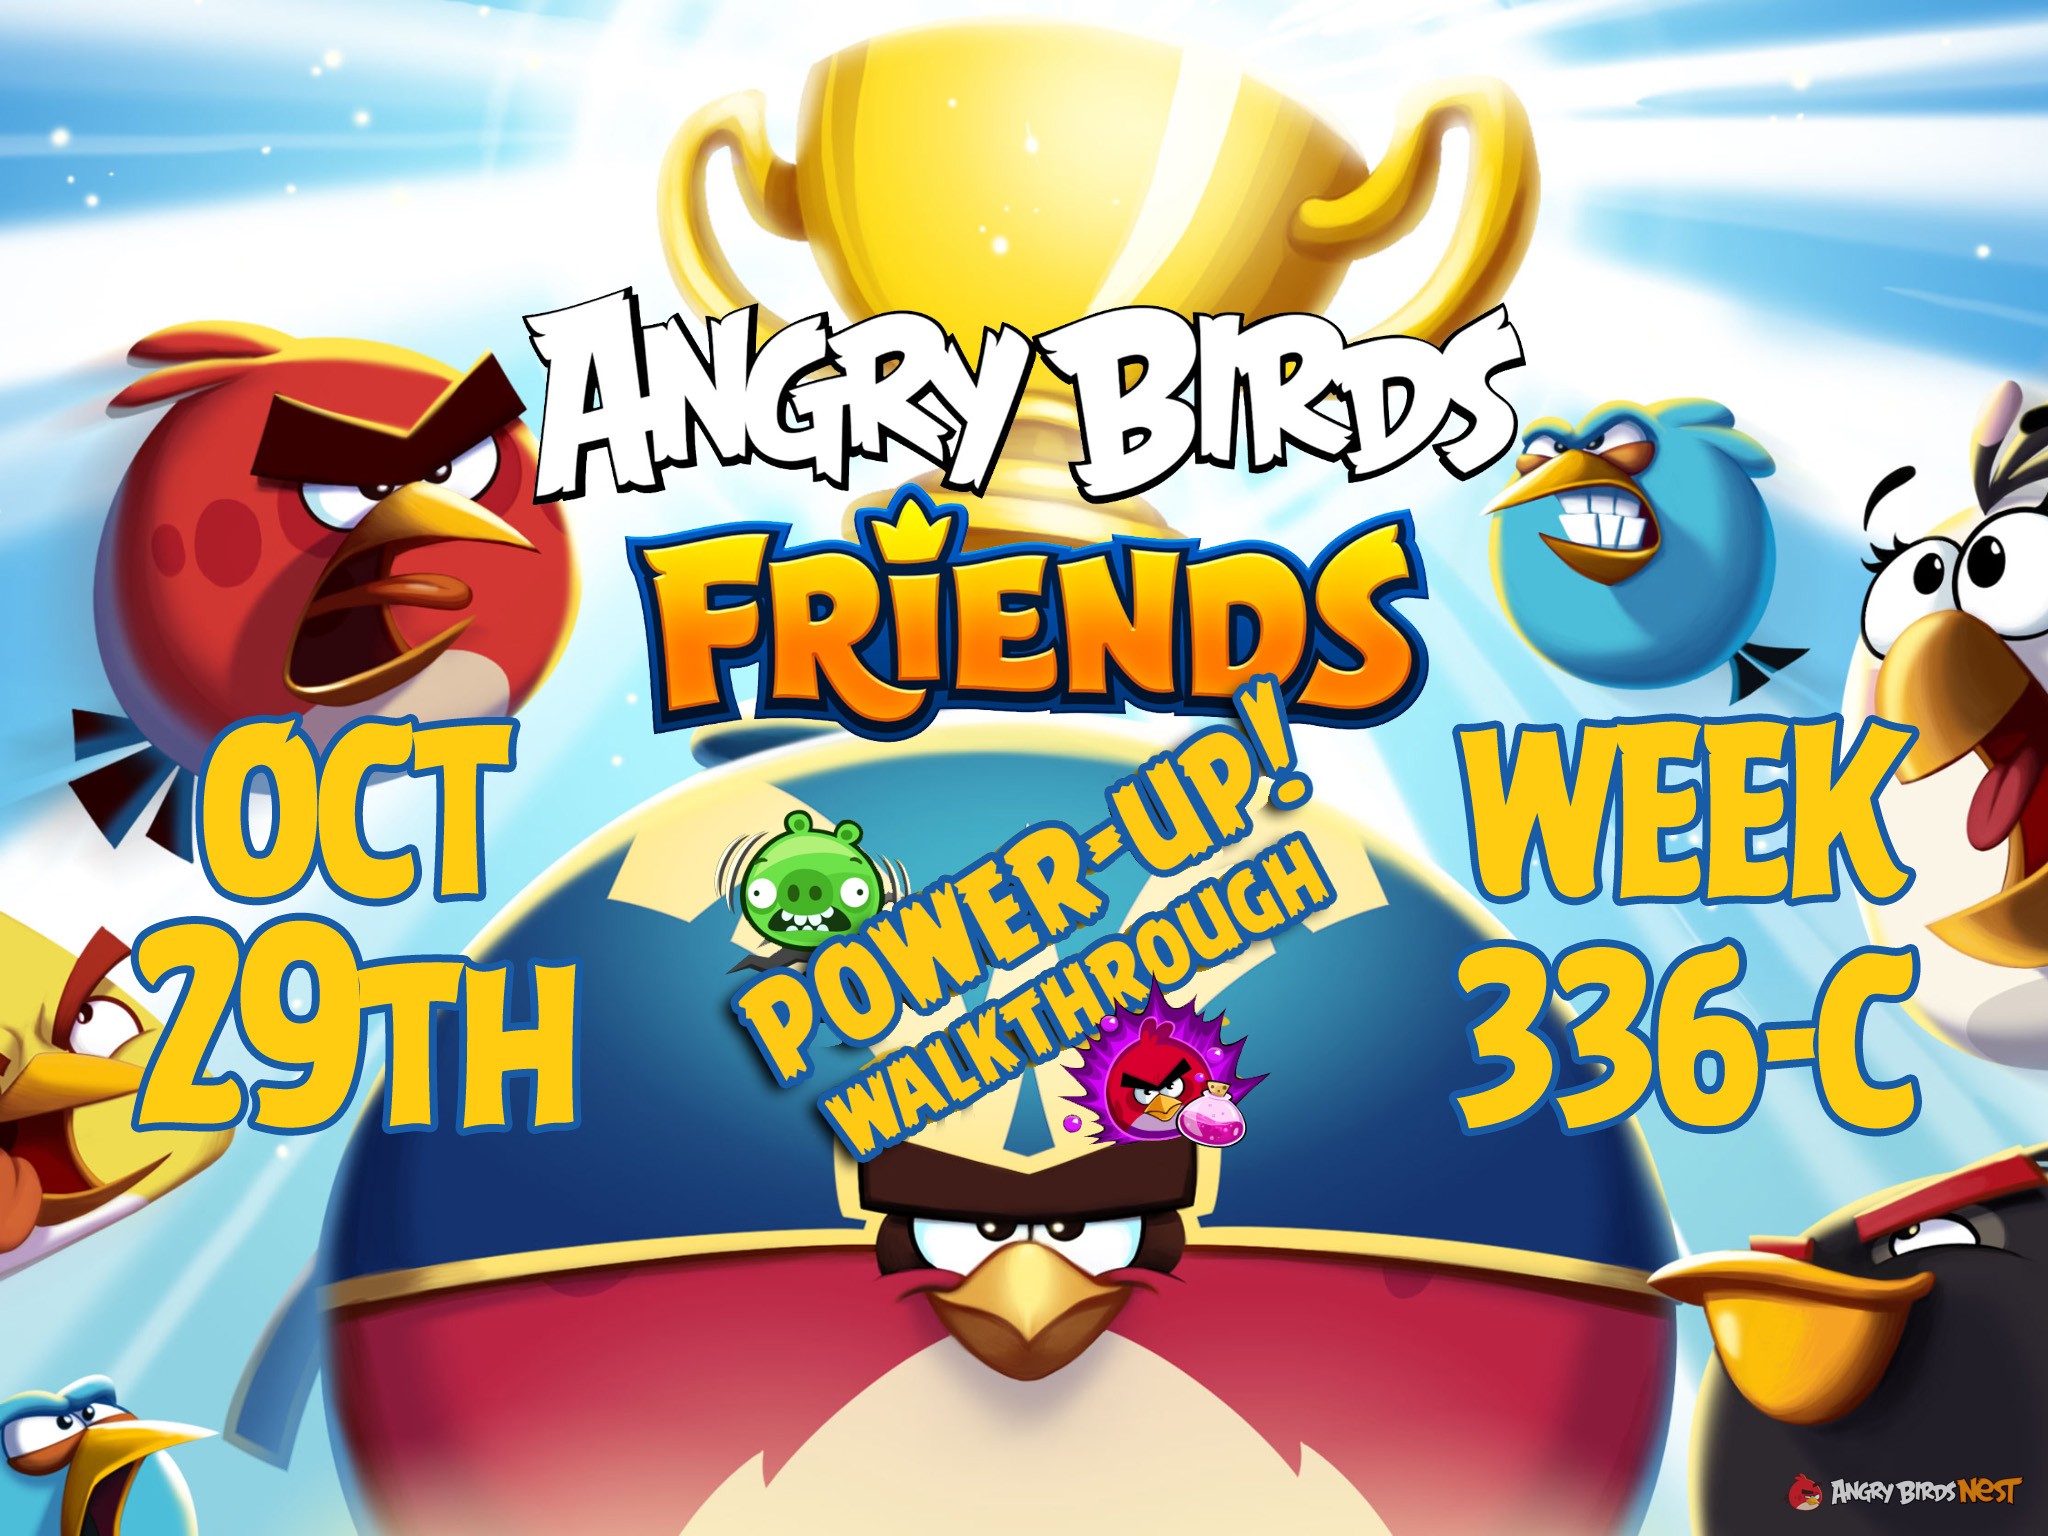 Angry-Birds-Friends-Tournament-Week-336-C-Feature-Image-PU